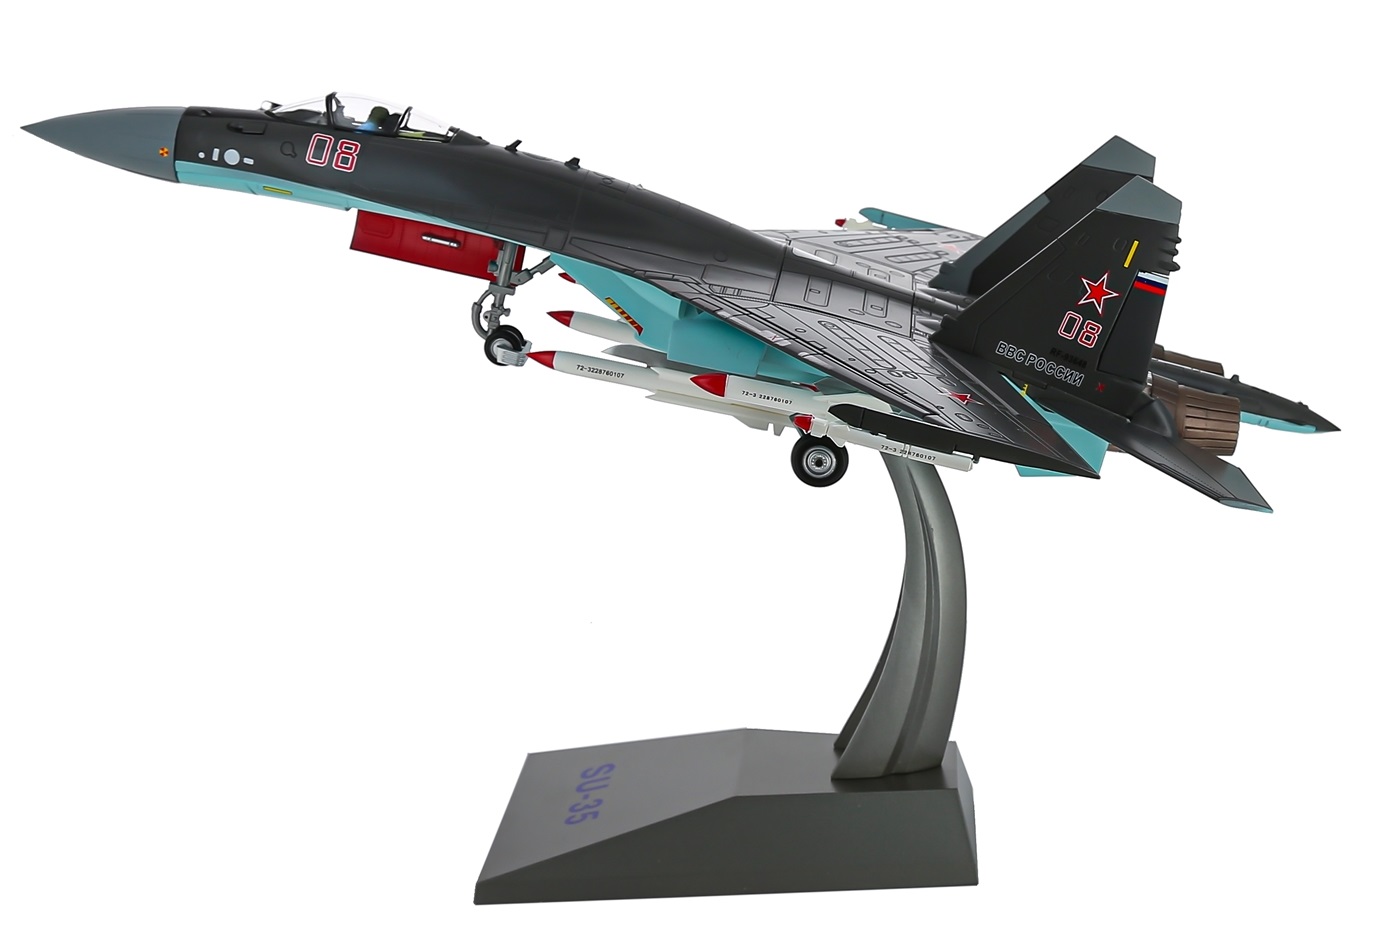       -35 ,  1:48.  47 . Large metal model of a Russian Su-35 fighter airplane, scale 1:48. Length 47 cm. # 2 hobbyplus.ru